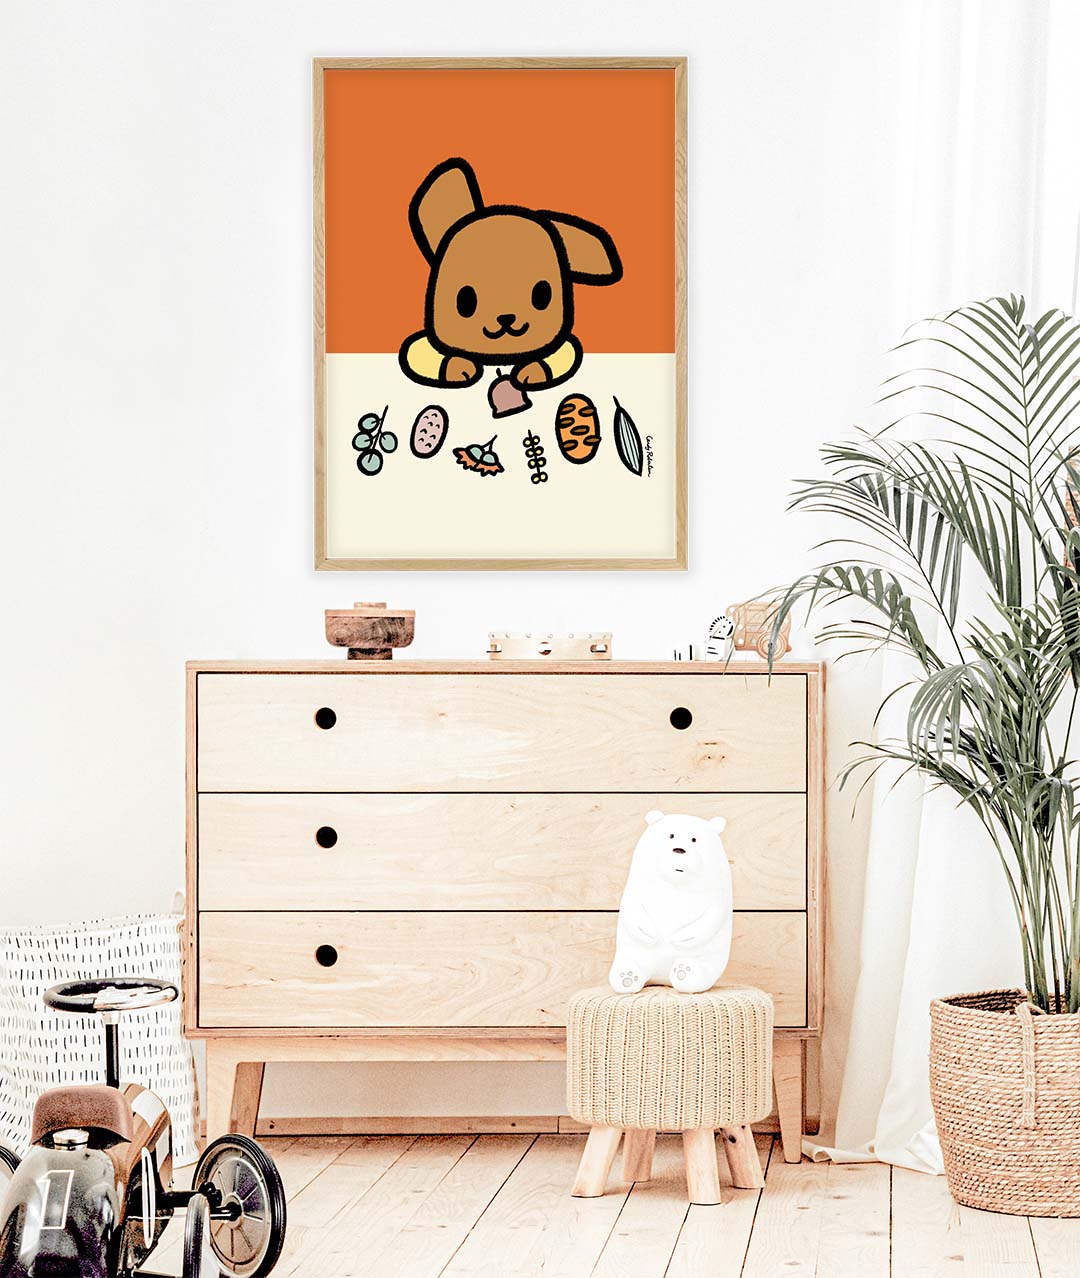 Roobee Roo: Bold Character Art for Stylish Kids' Rooms with a Pop Art Vibe